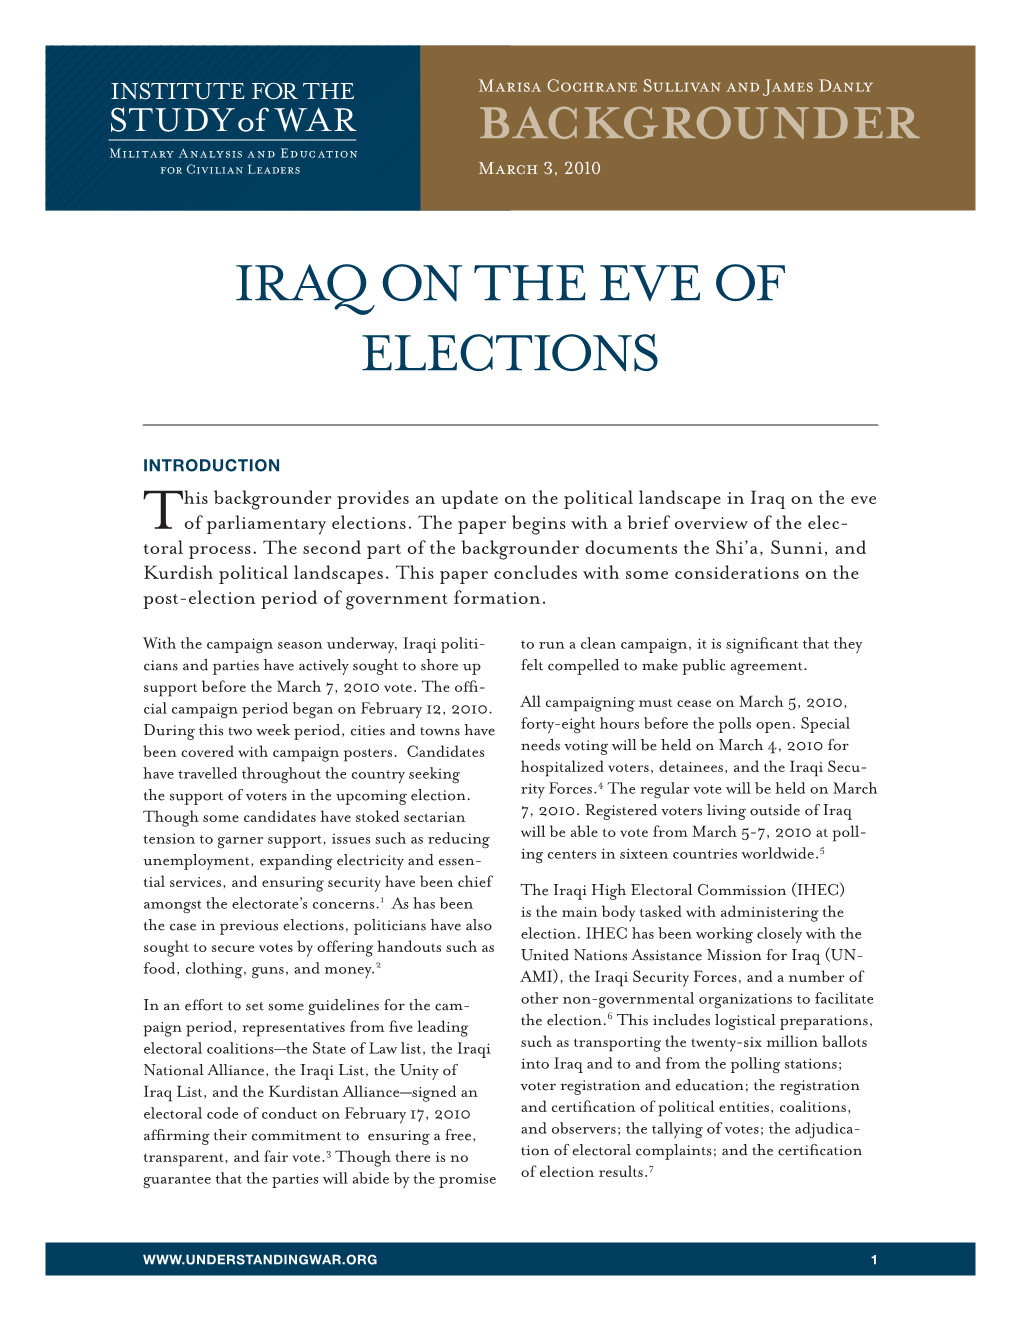 Iraq on the Eve of Elections